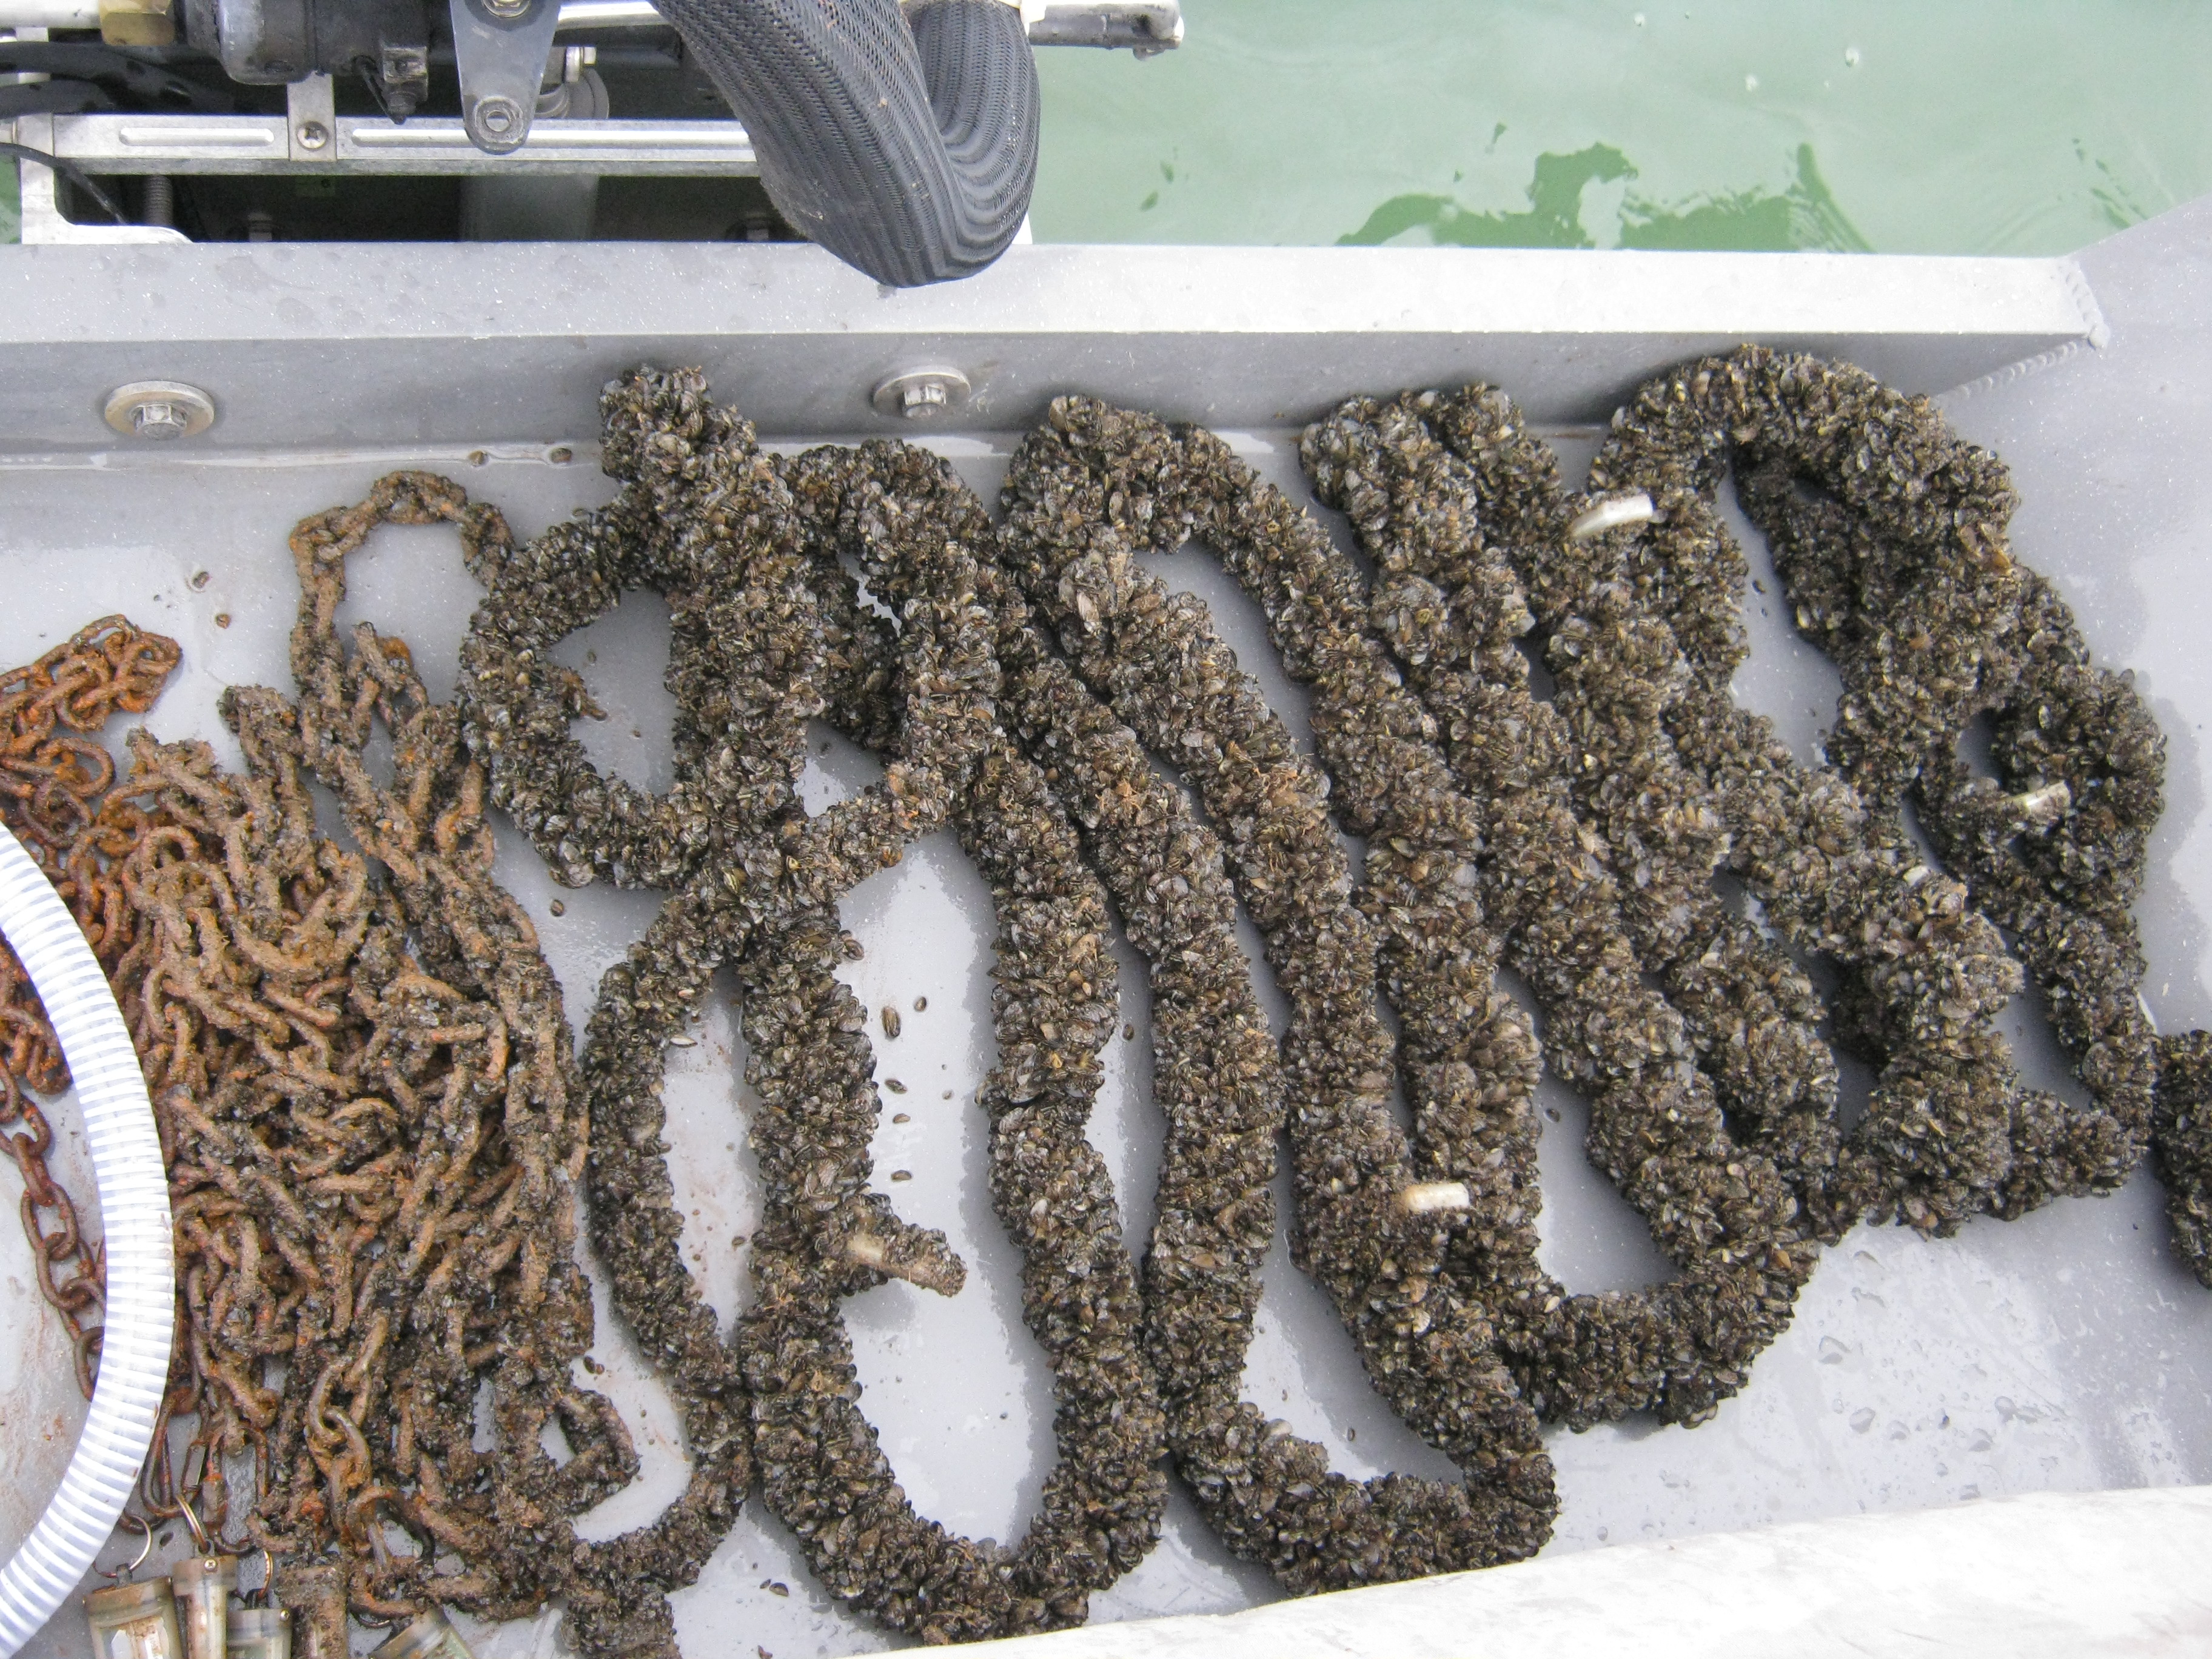 Several feet of heavy chain laid out in a boat trailer.  The section of chain which  had been underwater is fully encrusted with zebra mussels.